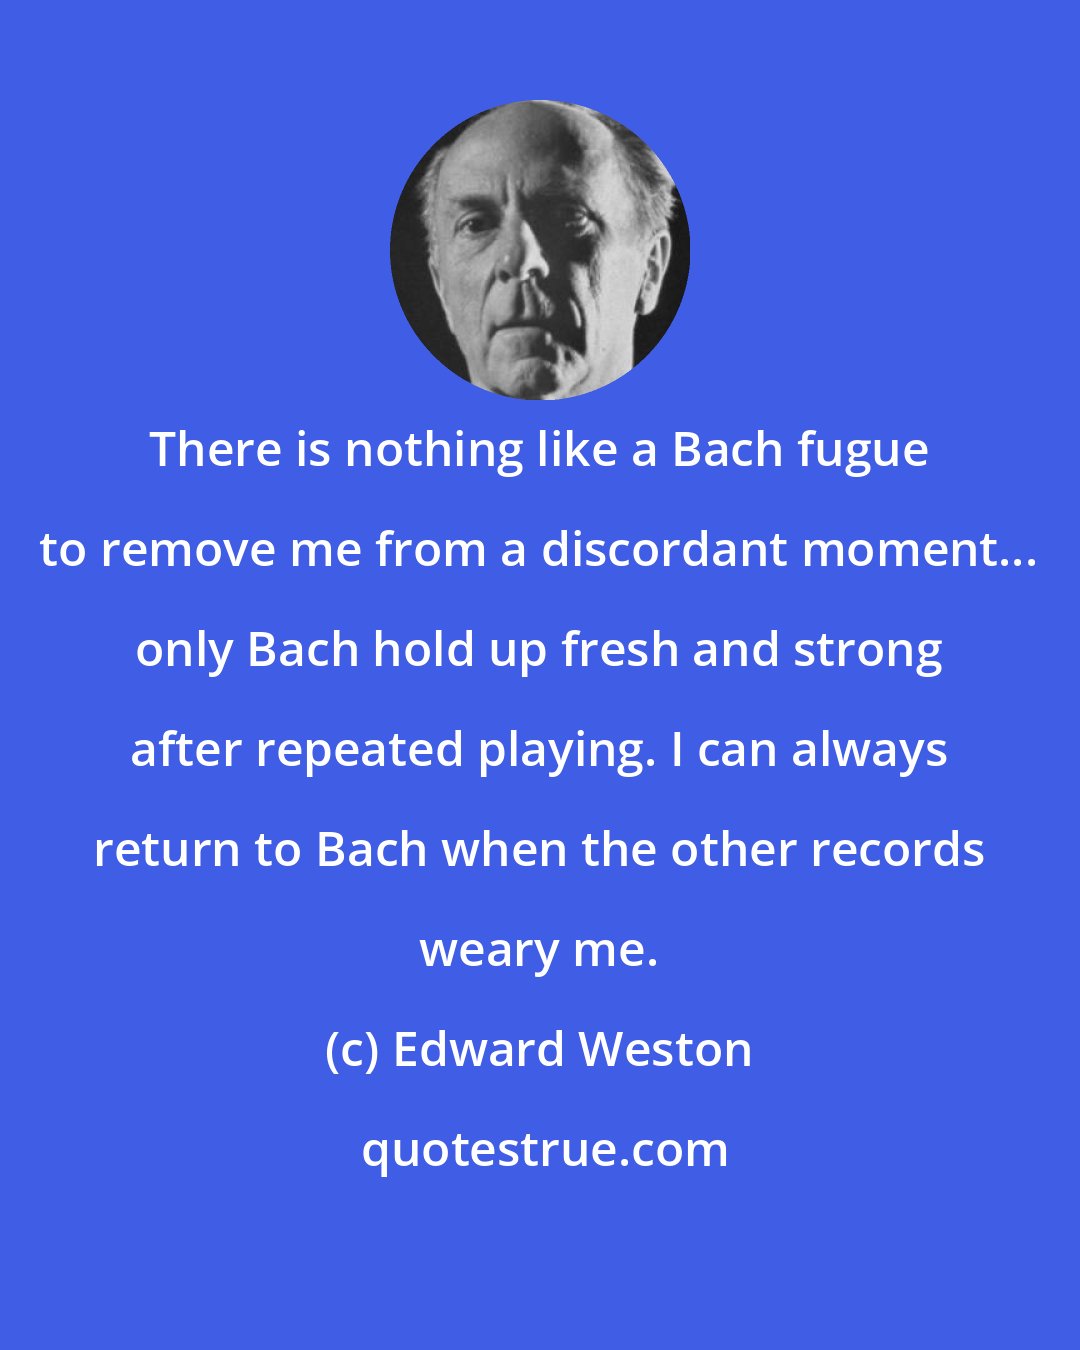 Edward Weston: There is nothing like a Bach fugue to remove me from a discordant moment... only Bach hold up fresh and strong after repeated playing. I can always return to Bach when the other records weary me.